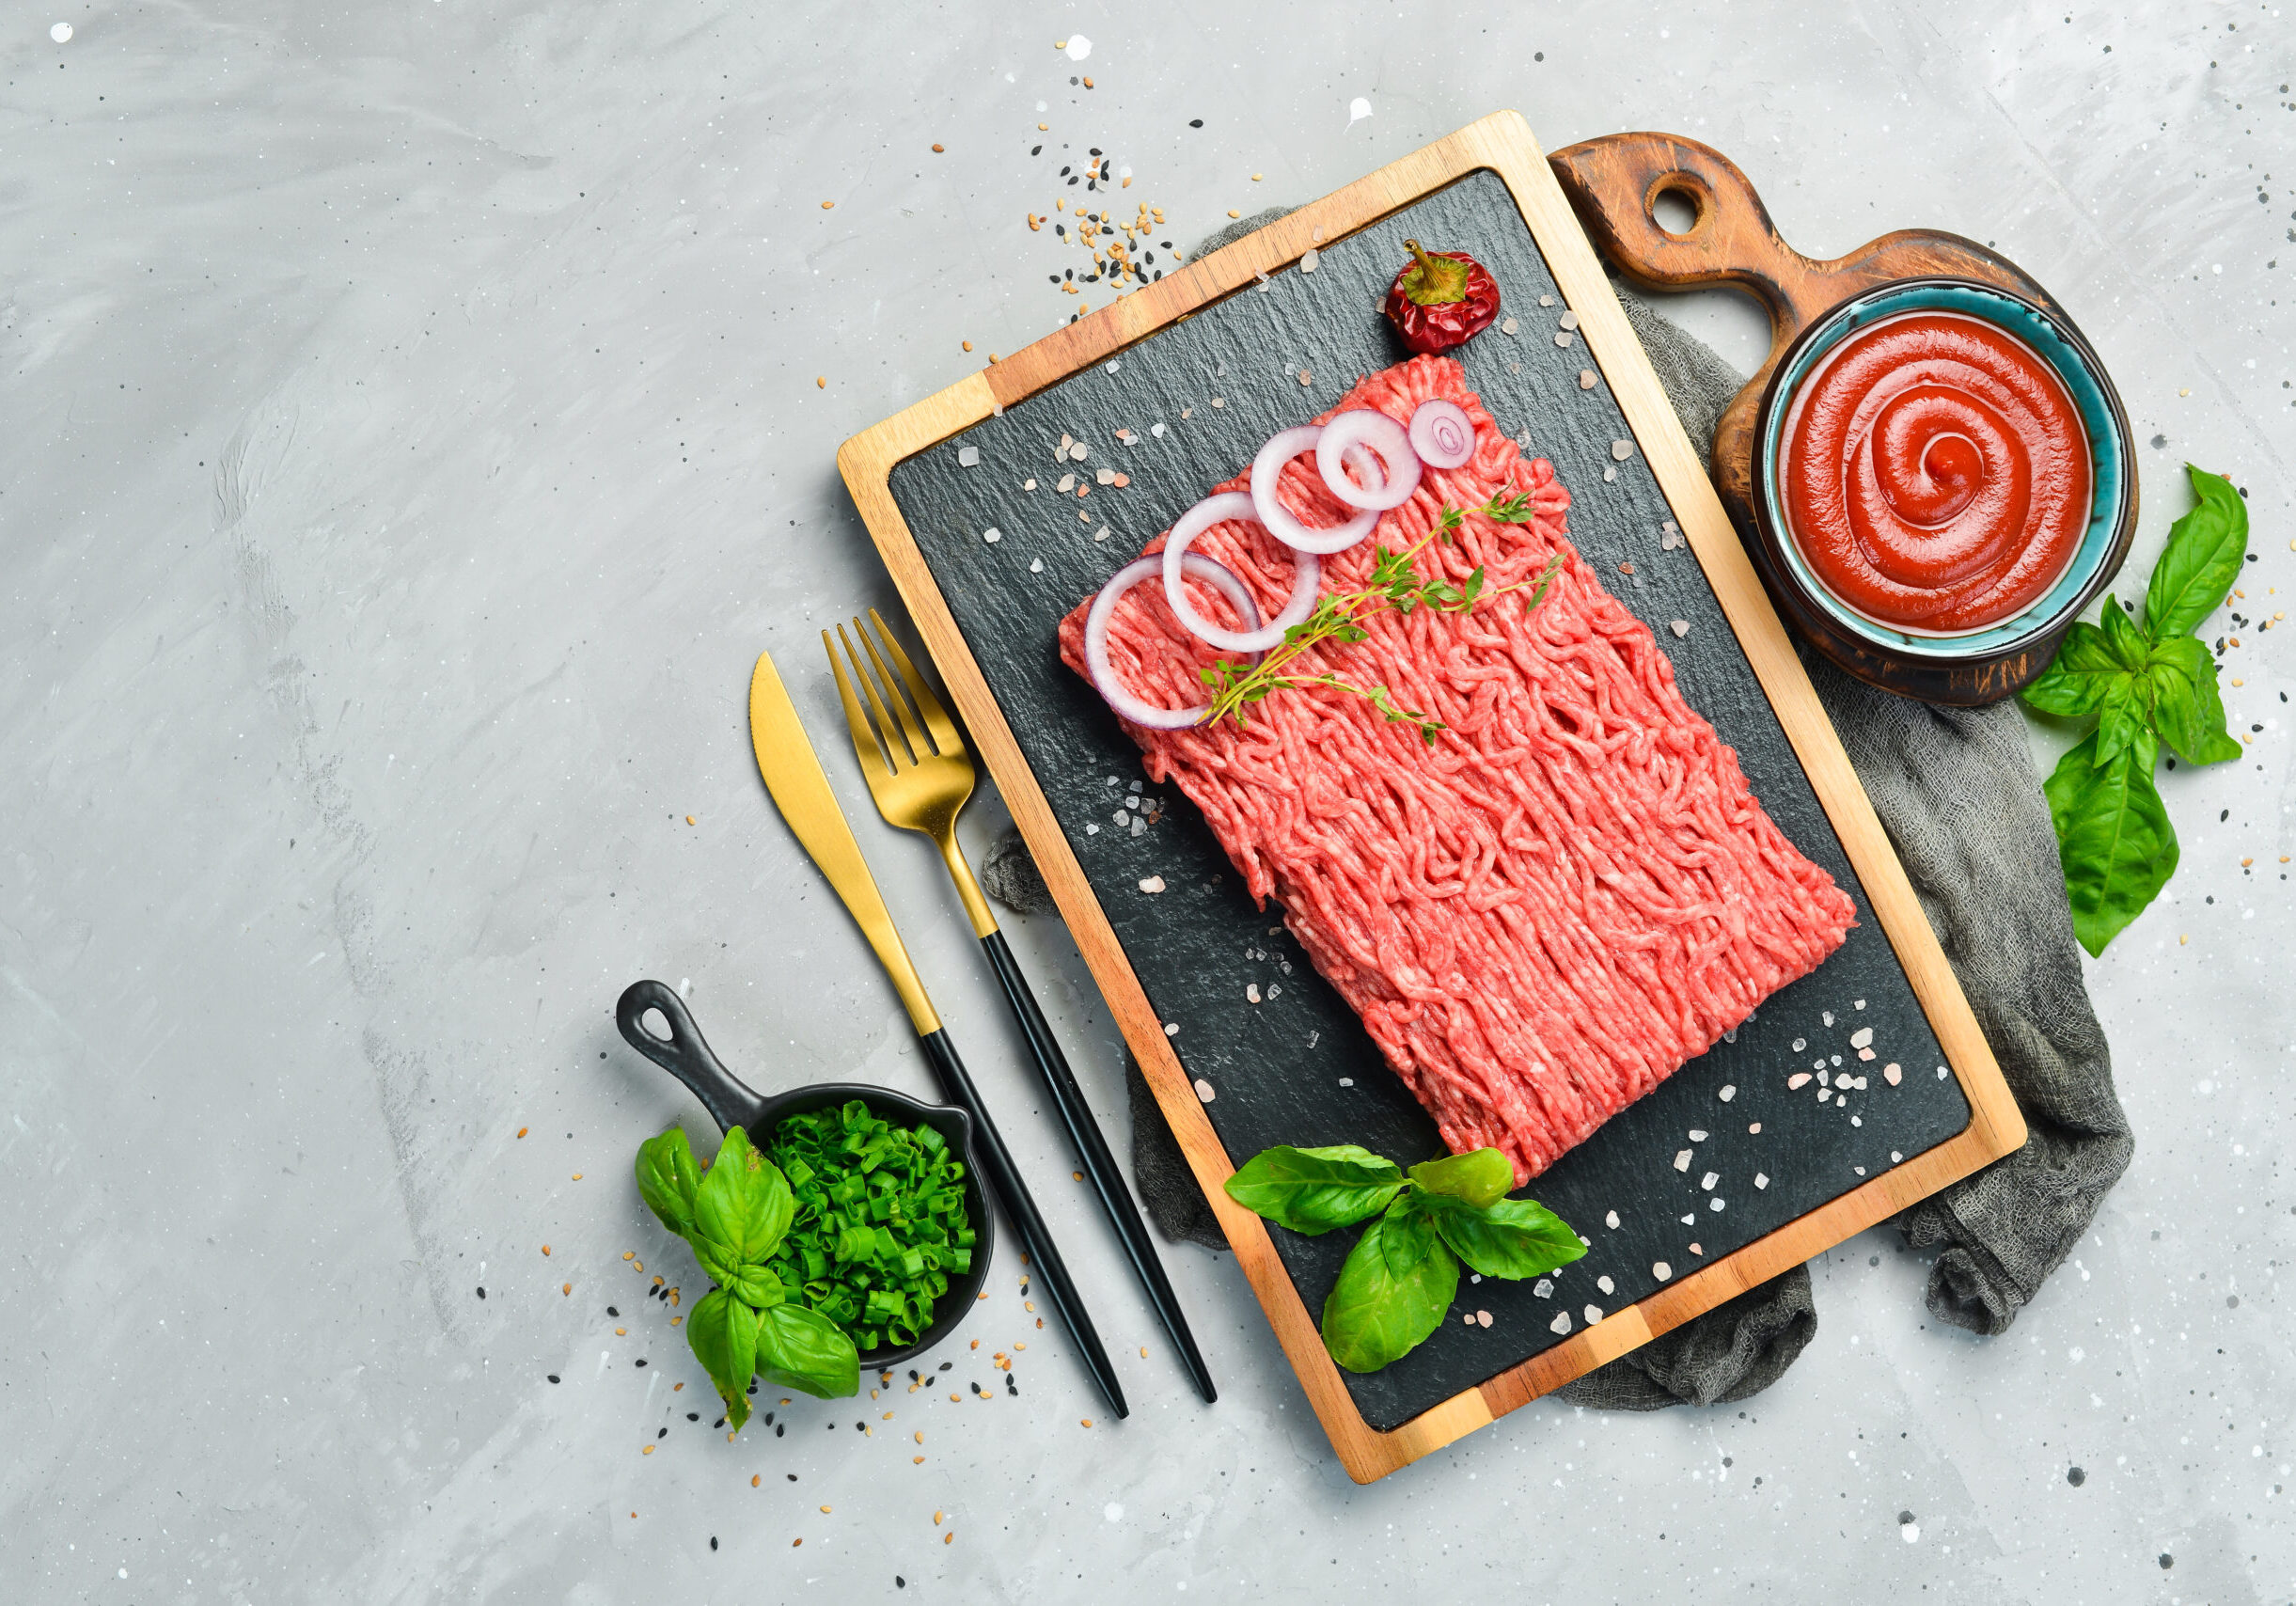 Meat Fresh ground minced beef on a plate Preparation of cutlets Top view On a stone background